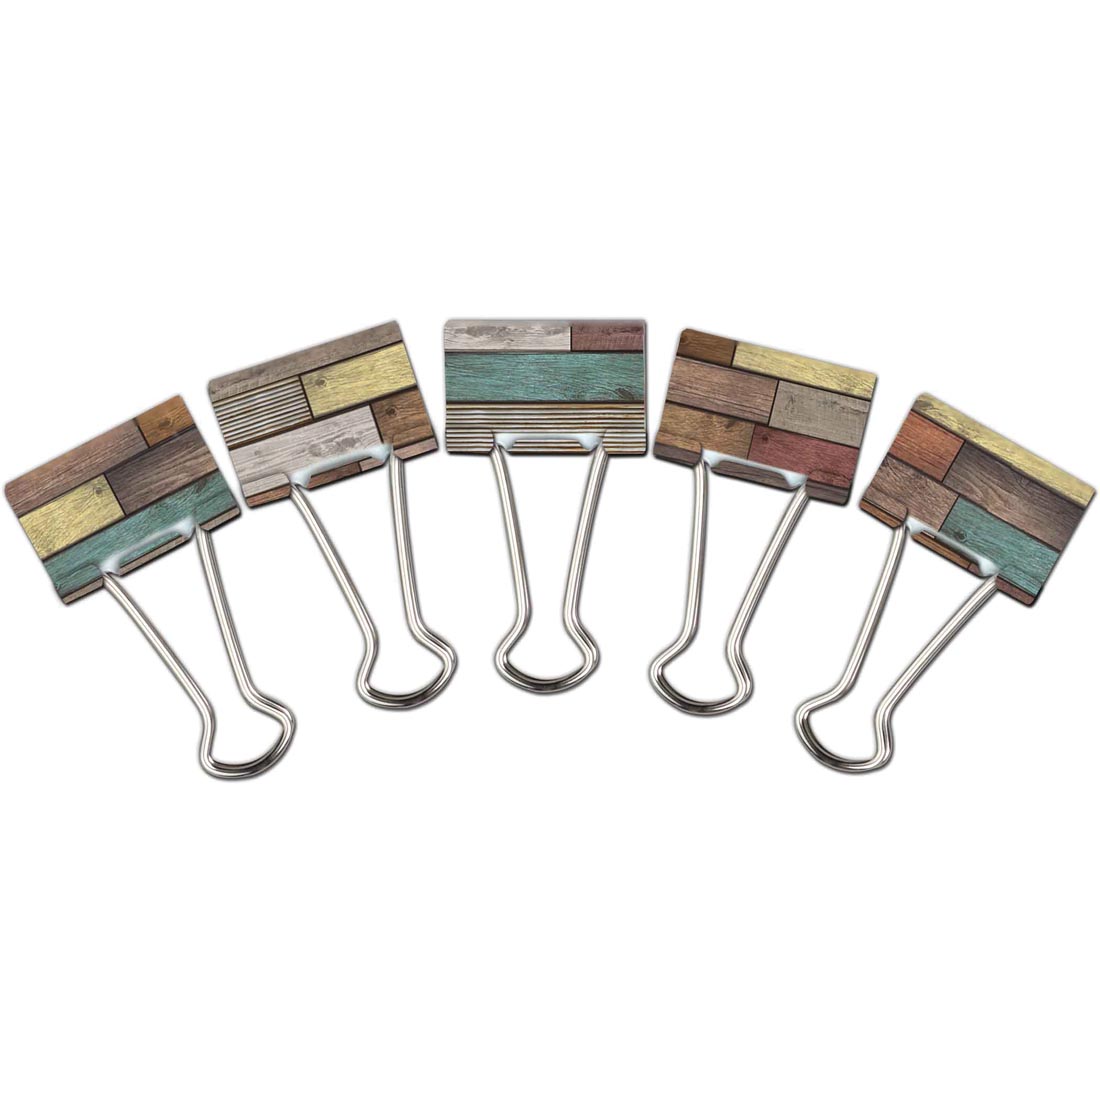 Home Sweet Classroom Reclaimed Wood Binder Clips by Teacher Created Resources 